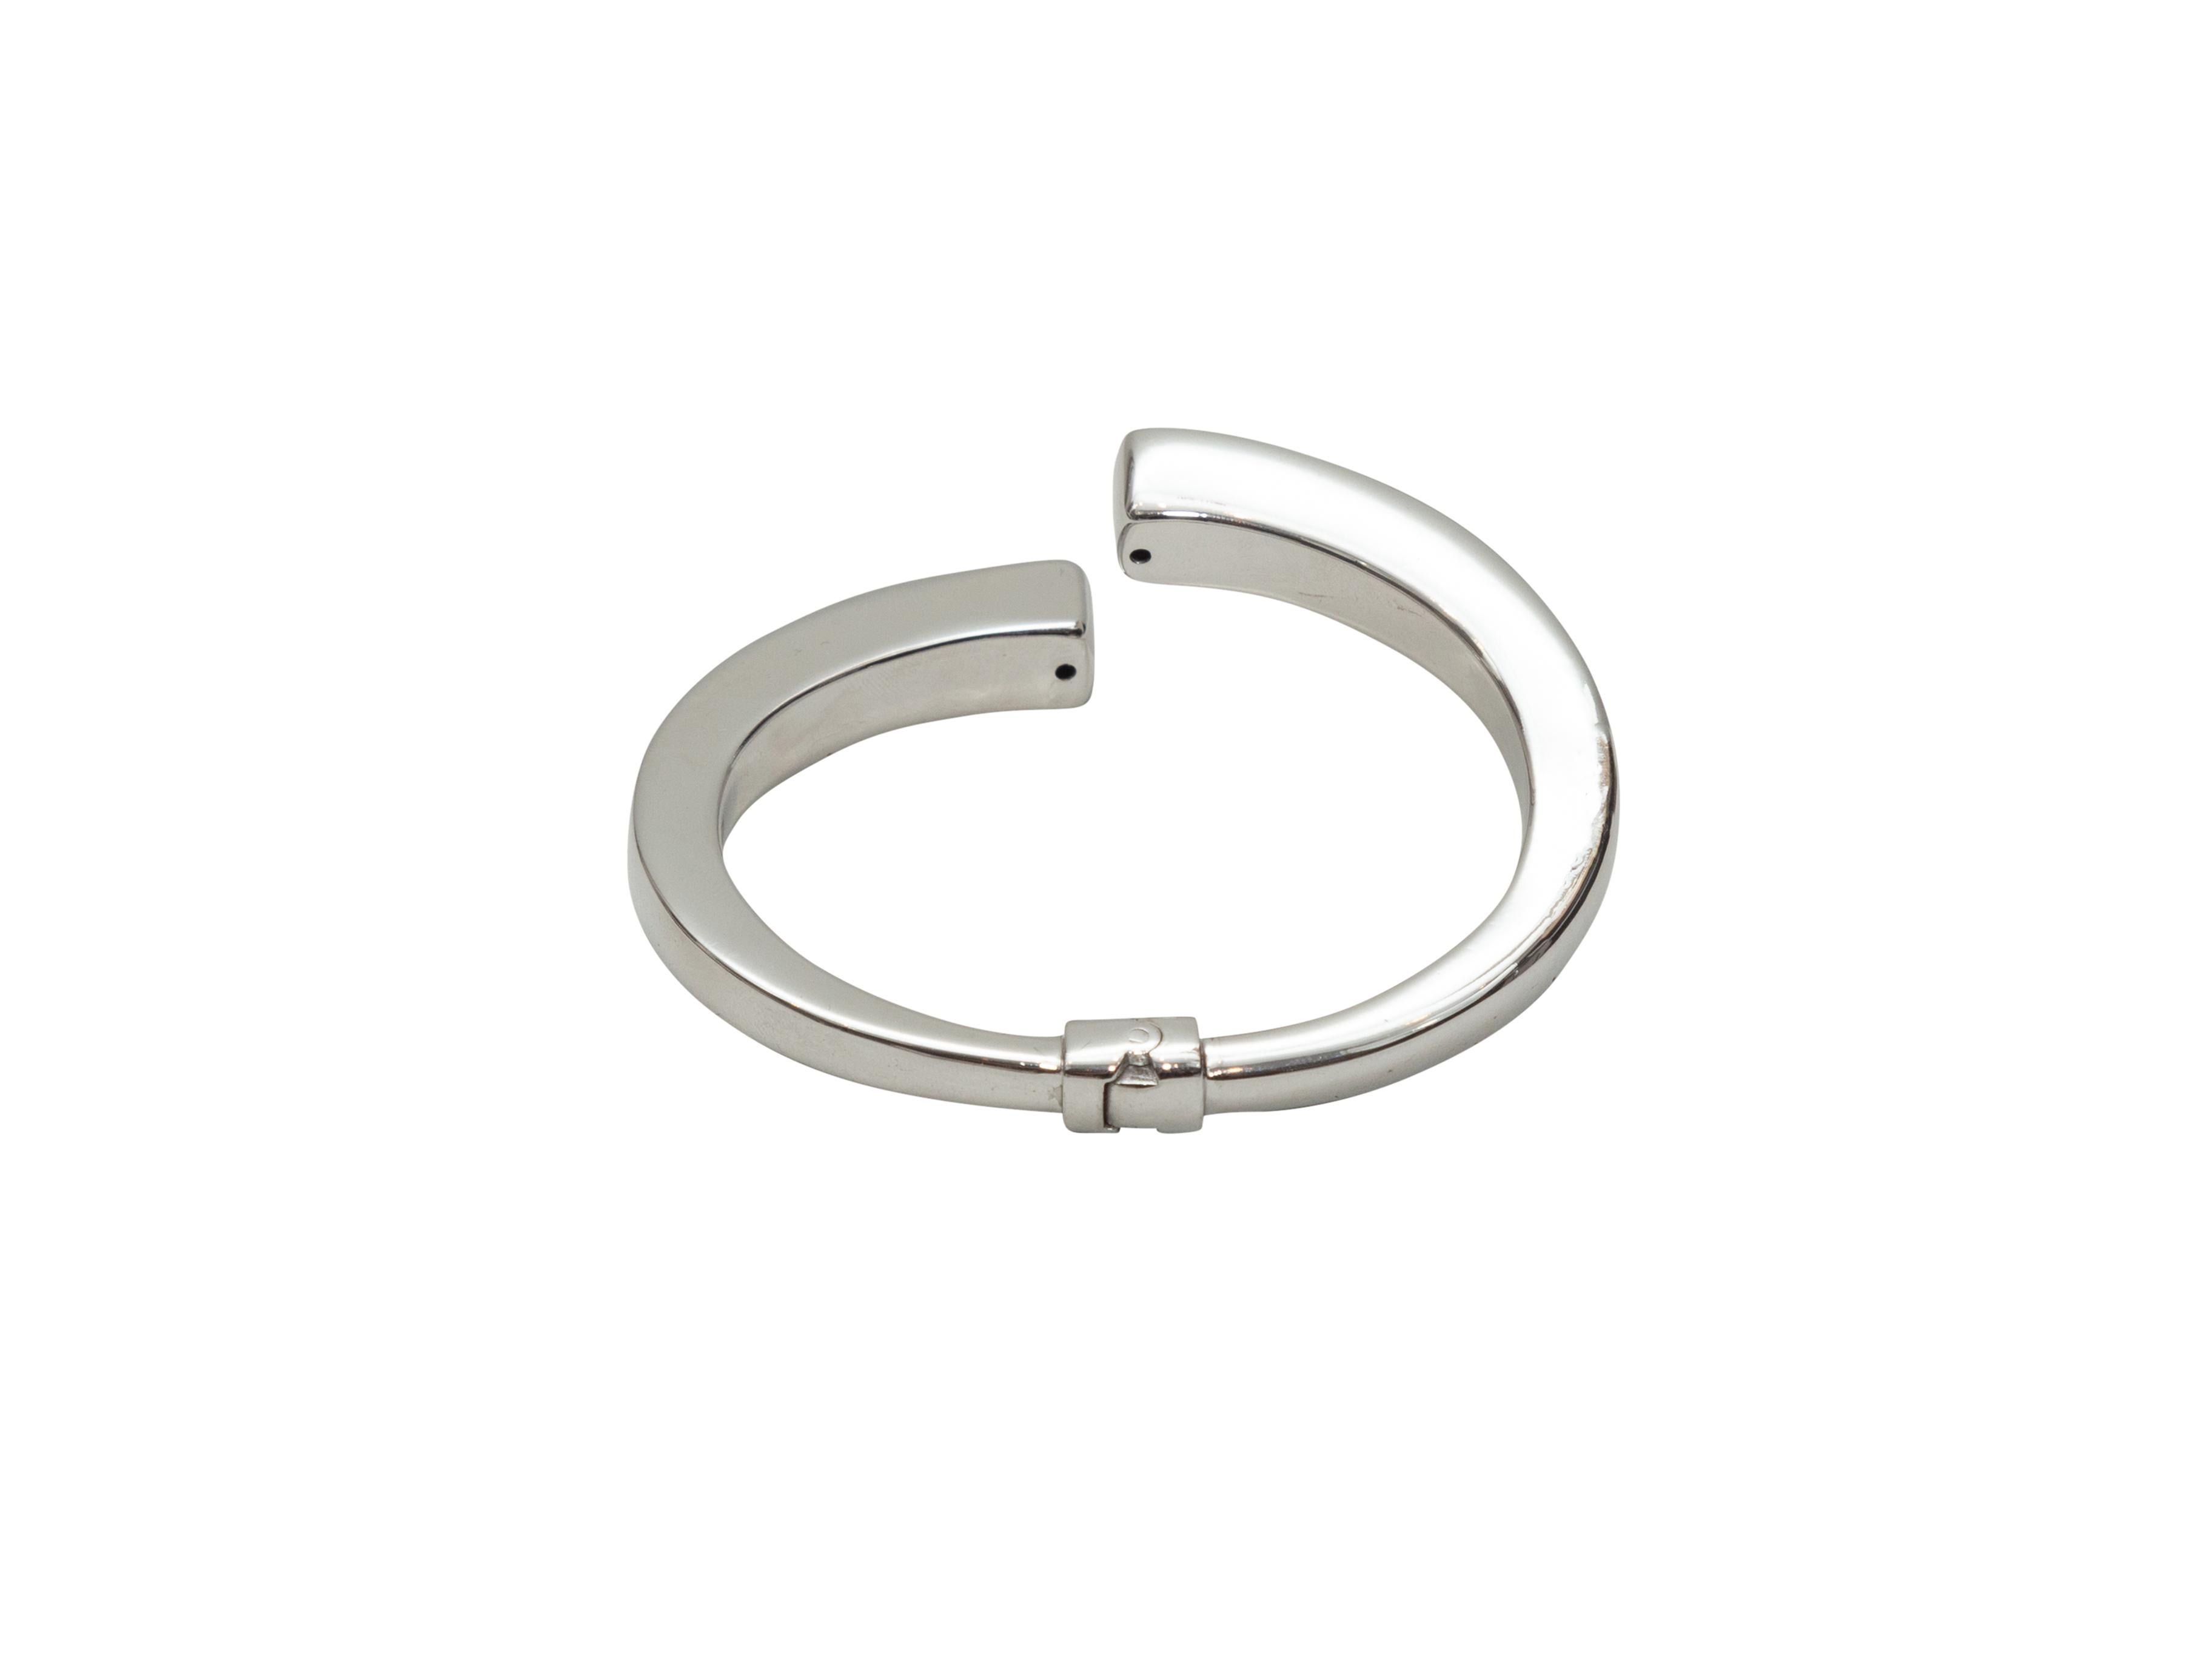 Product details: Sterling silver small hinged cuff bracelet. 2